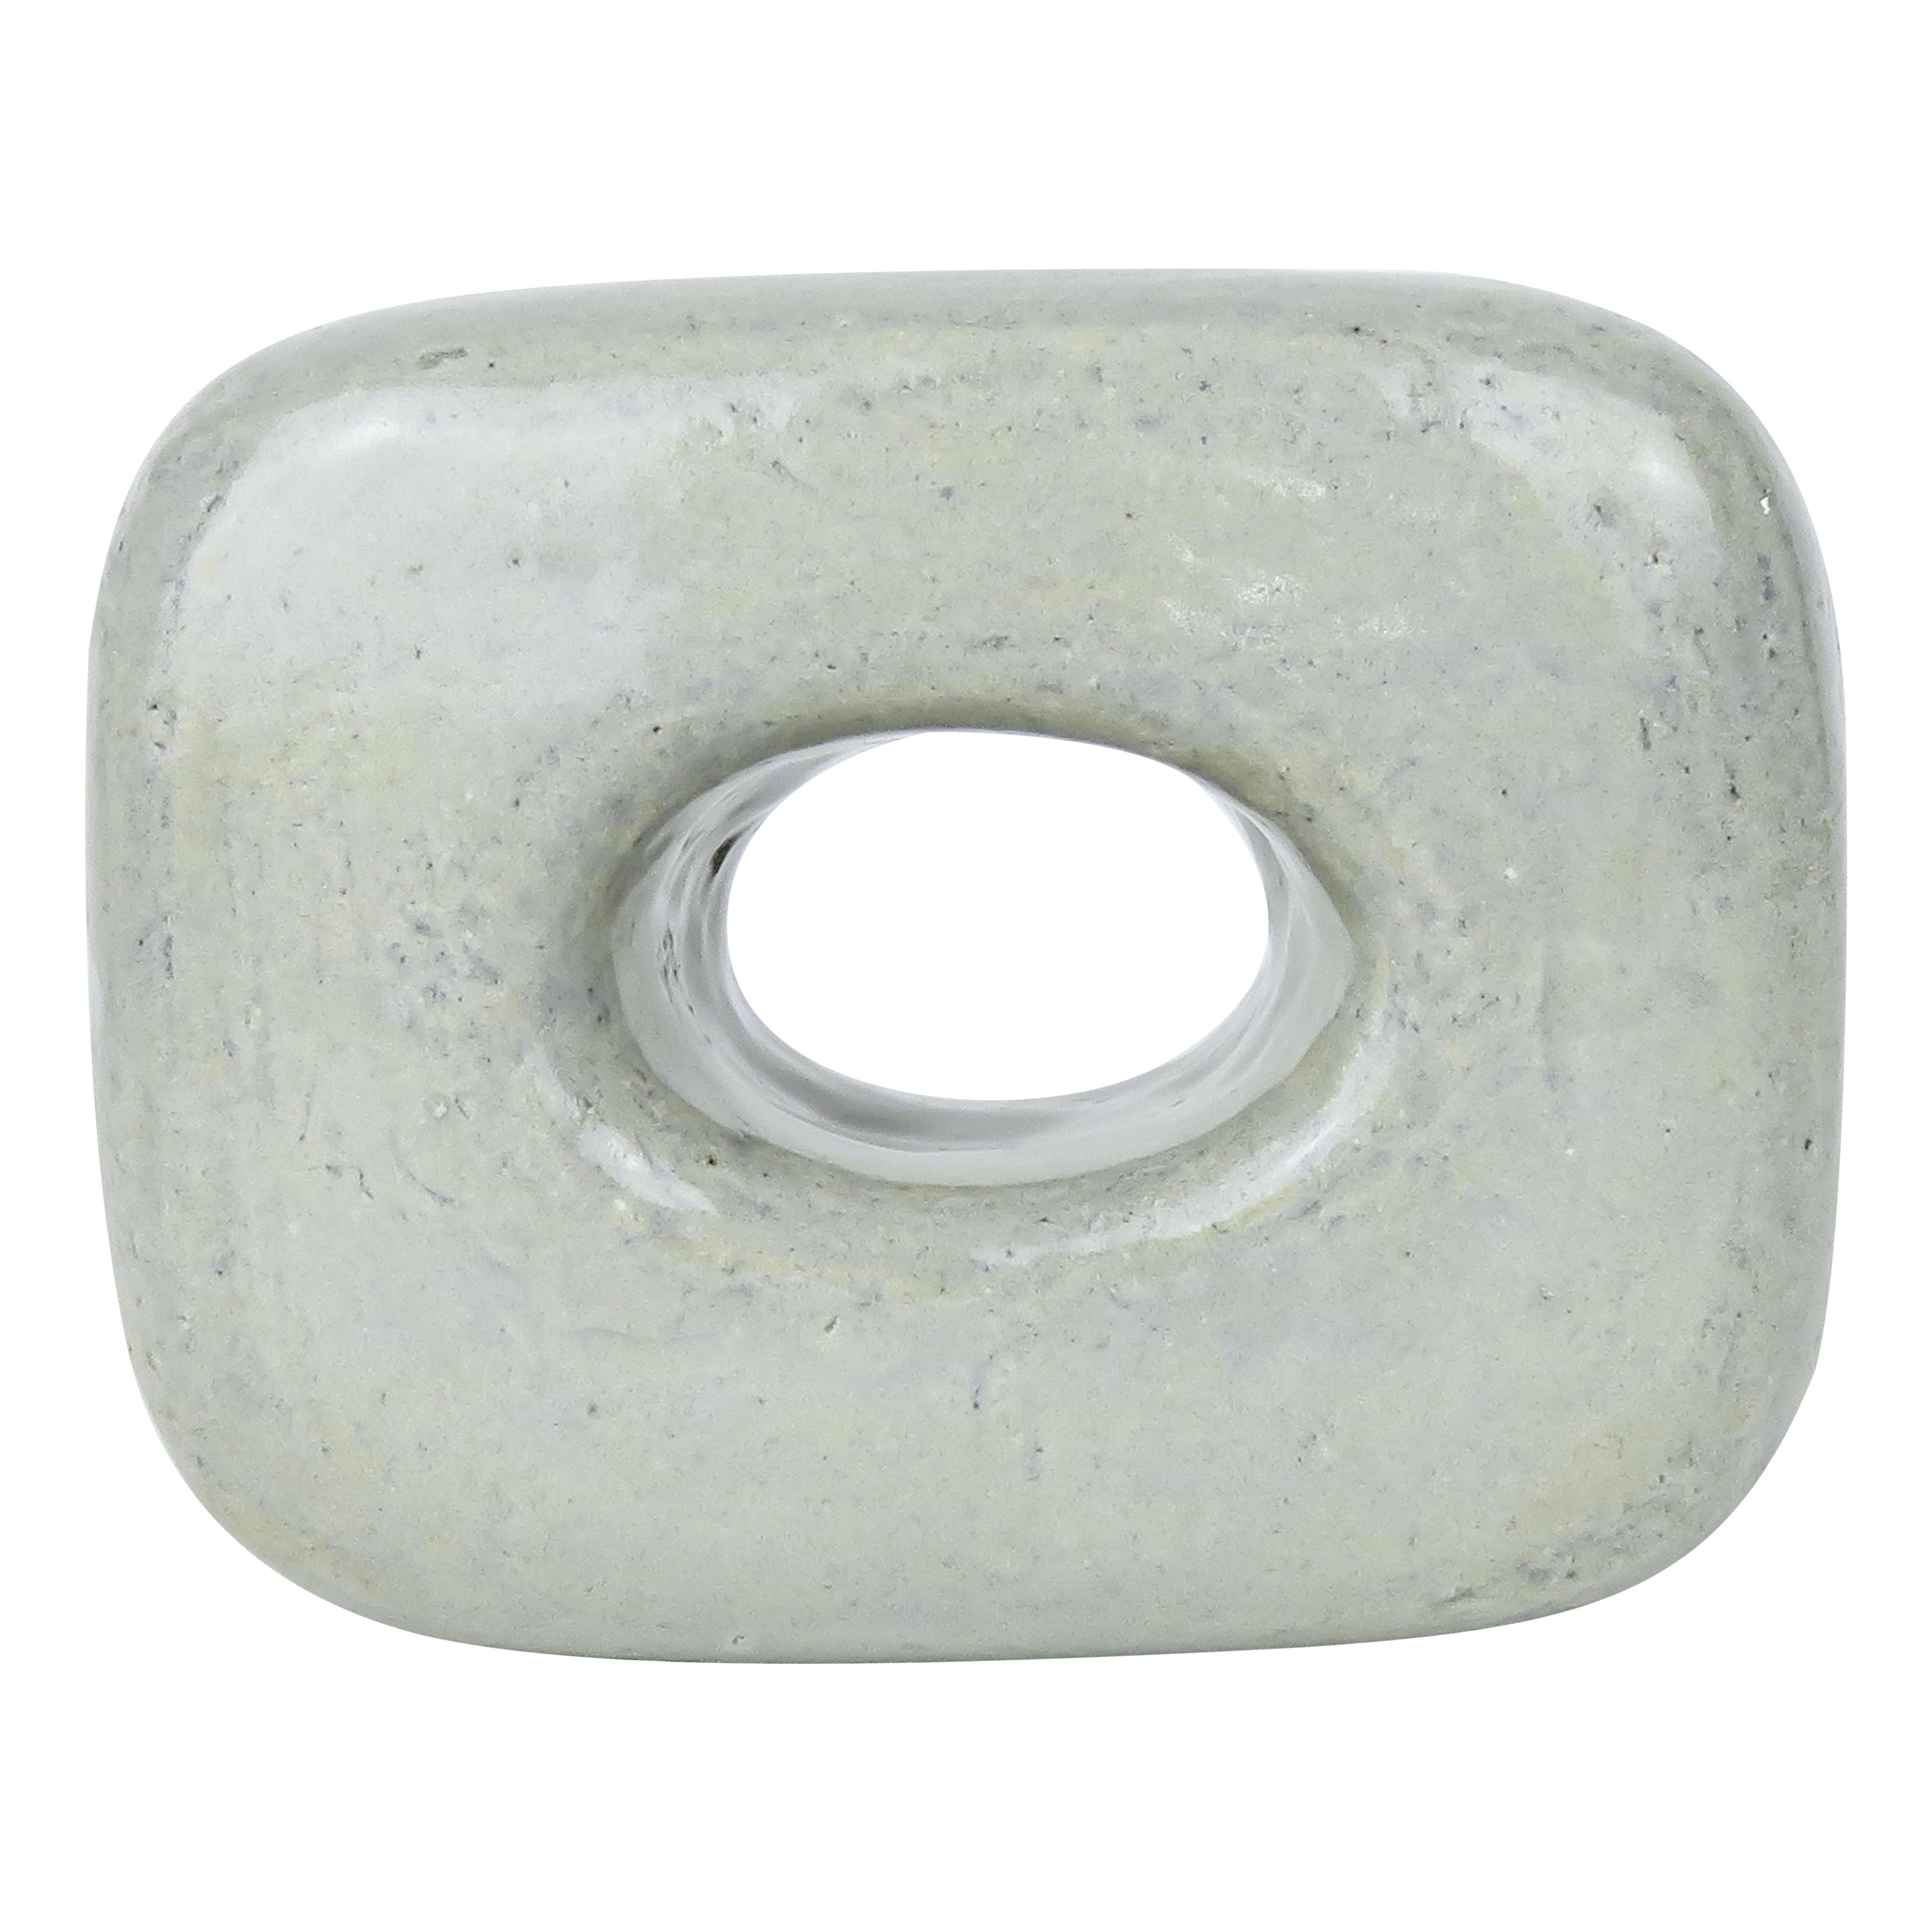 Ceramic Sculpture, Oblong Cube with Oval Opening in Glossy Gray Glaze